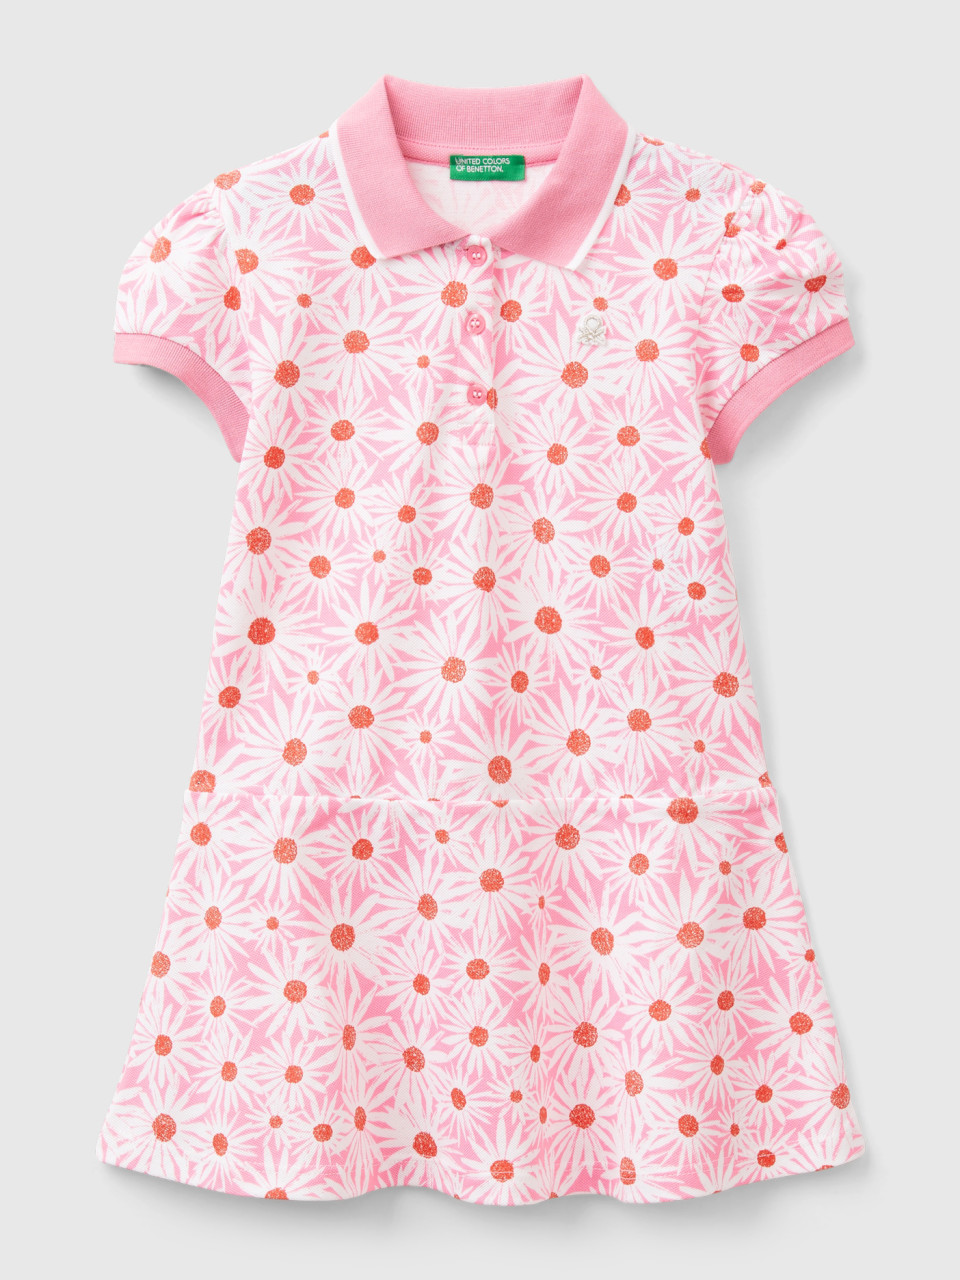 Benetton, Light Pink Polo-style Dress With Floral Print, Soft Pink, Kids